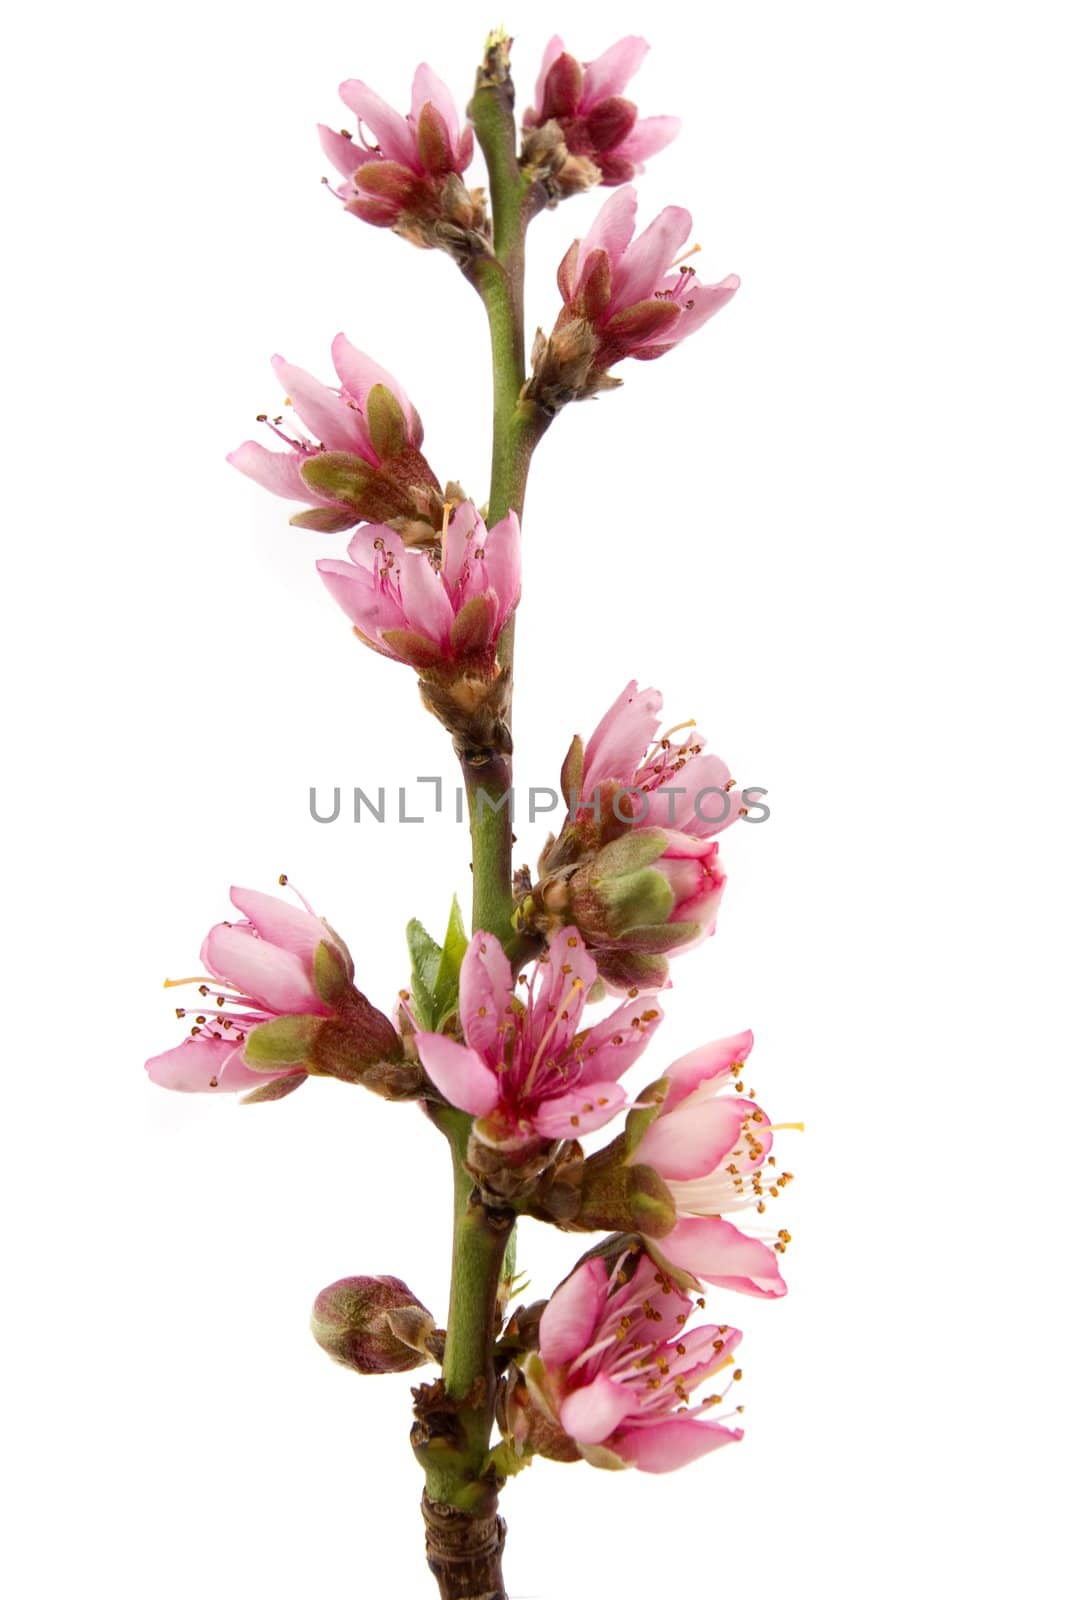 Peach blossom in spring with white background